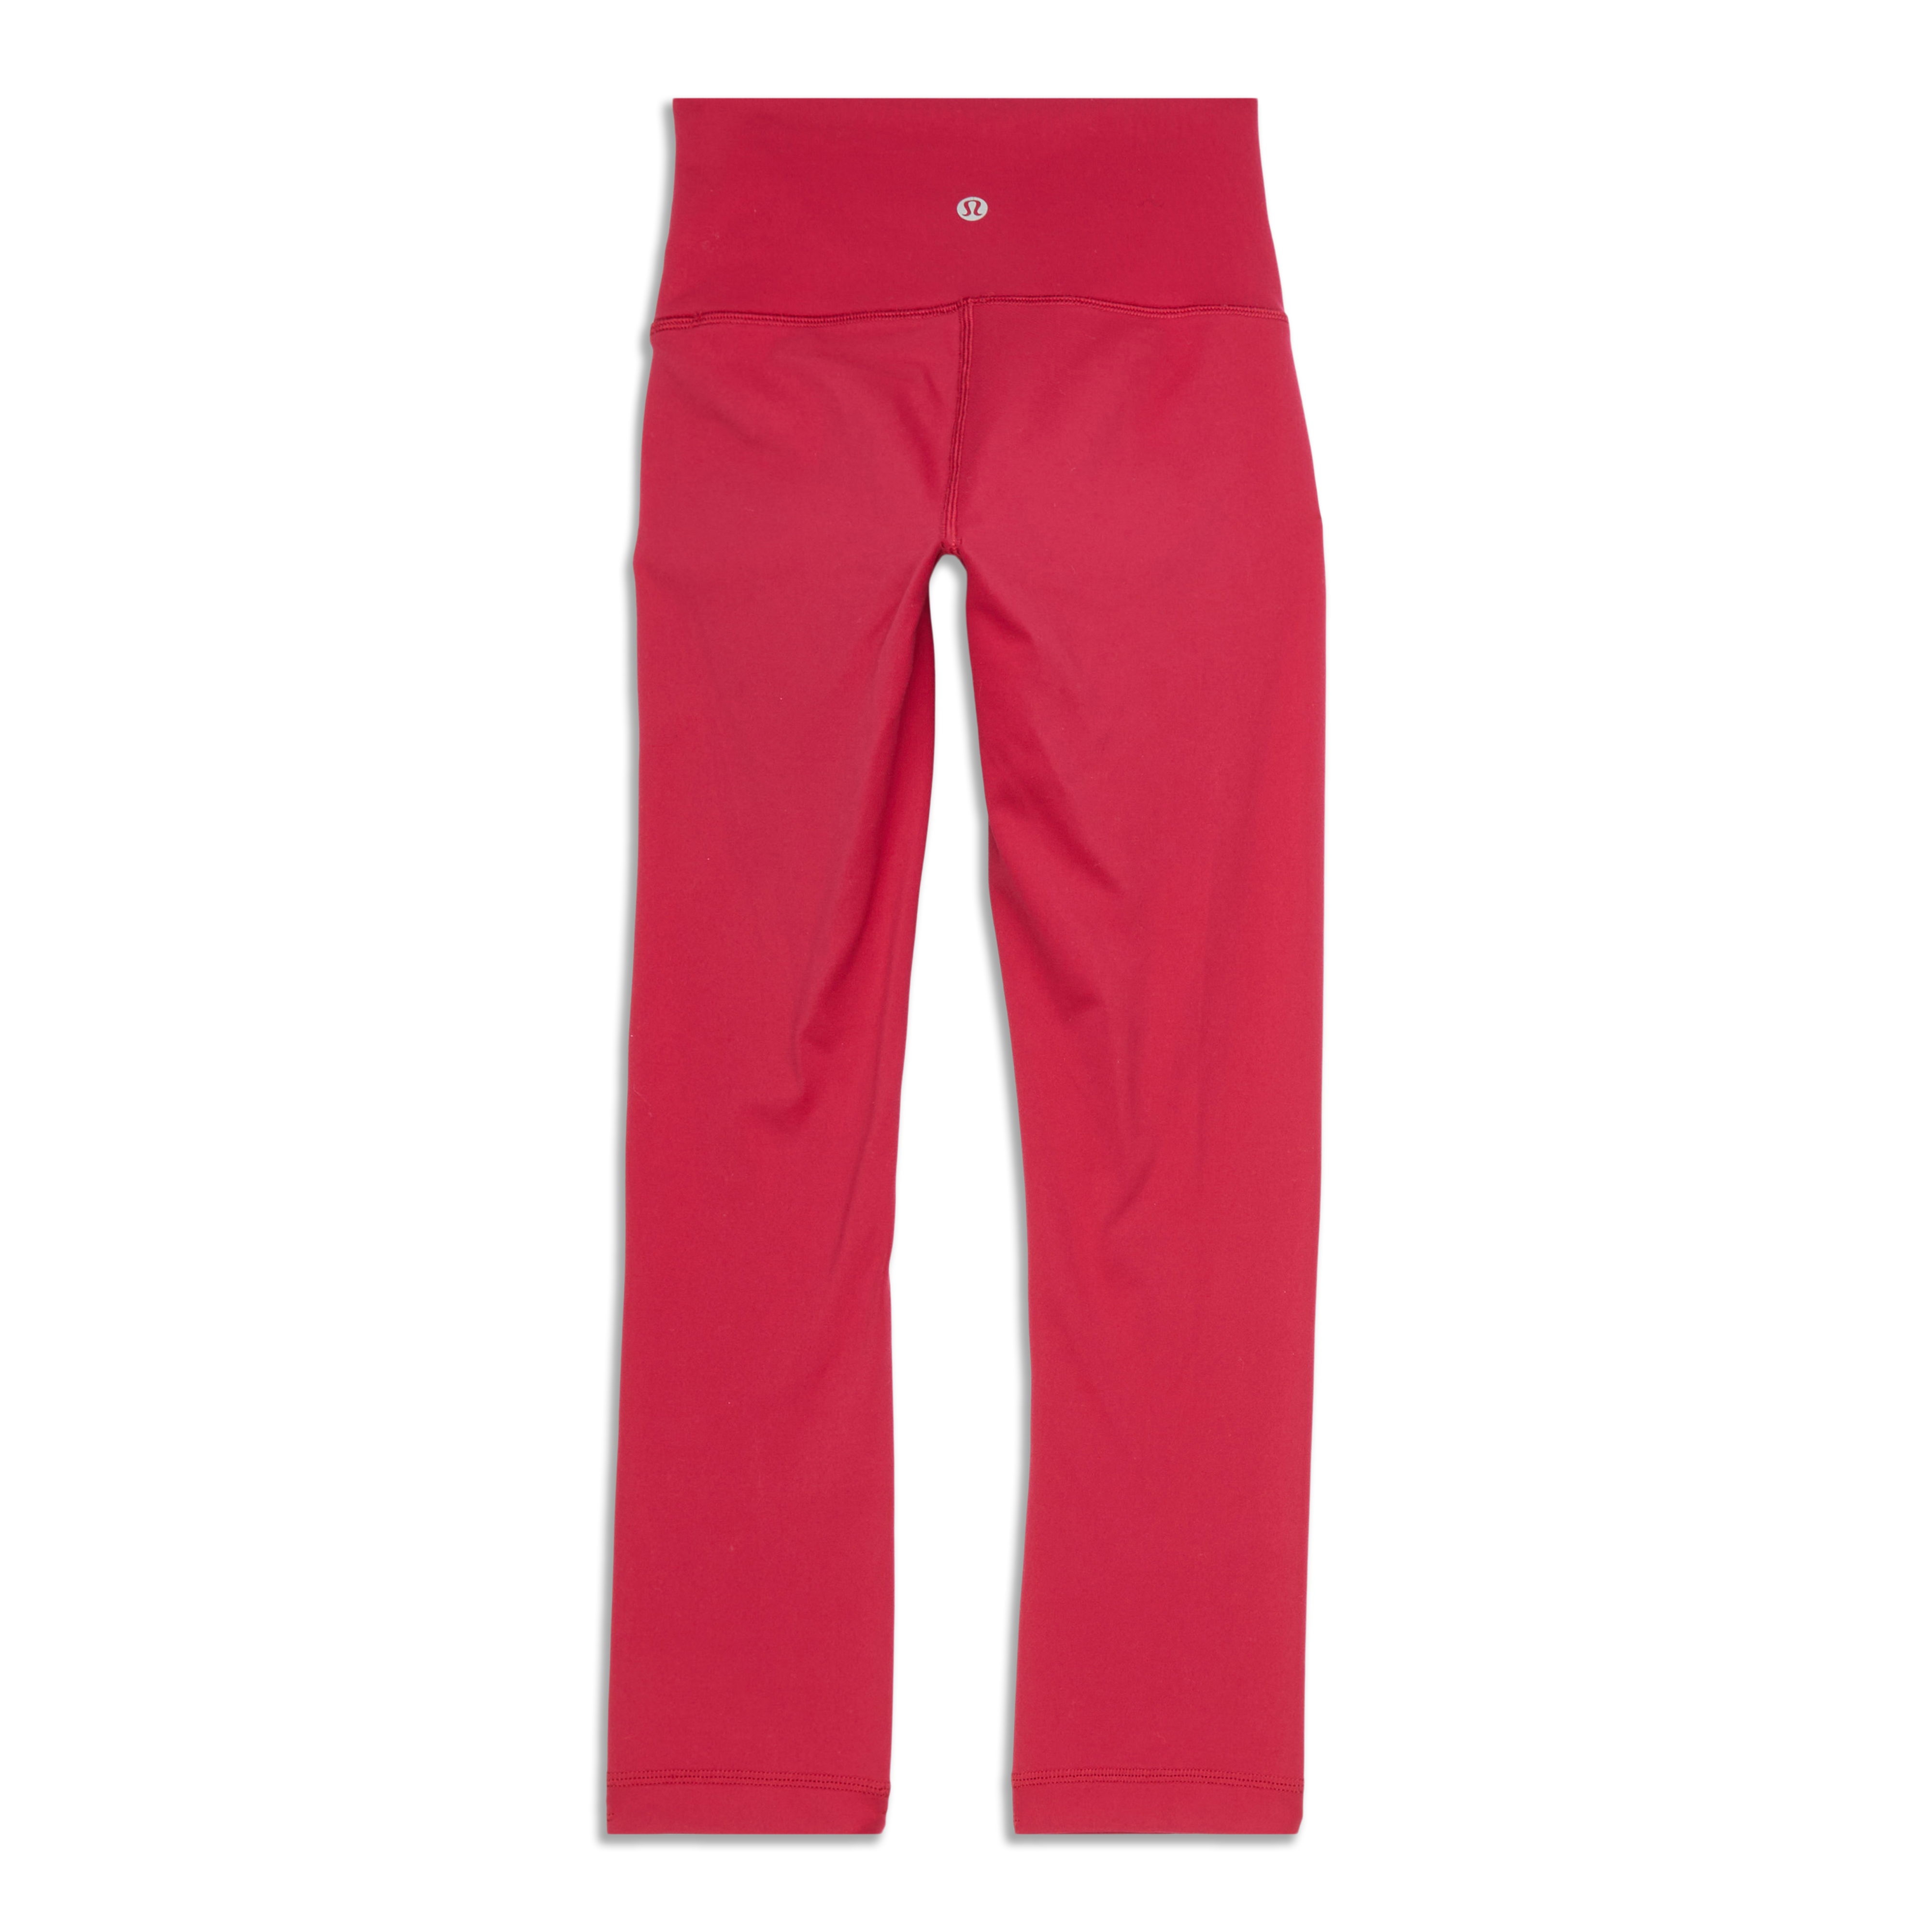 Lululemon Wunder Under Leggings Red Size 10 - $80 (18% Off Retail) New With  Tags - From Lauren